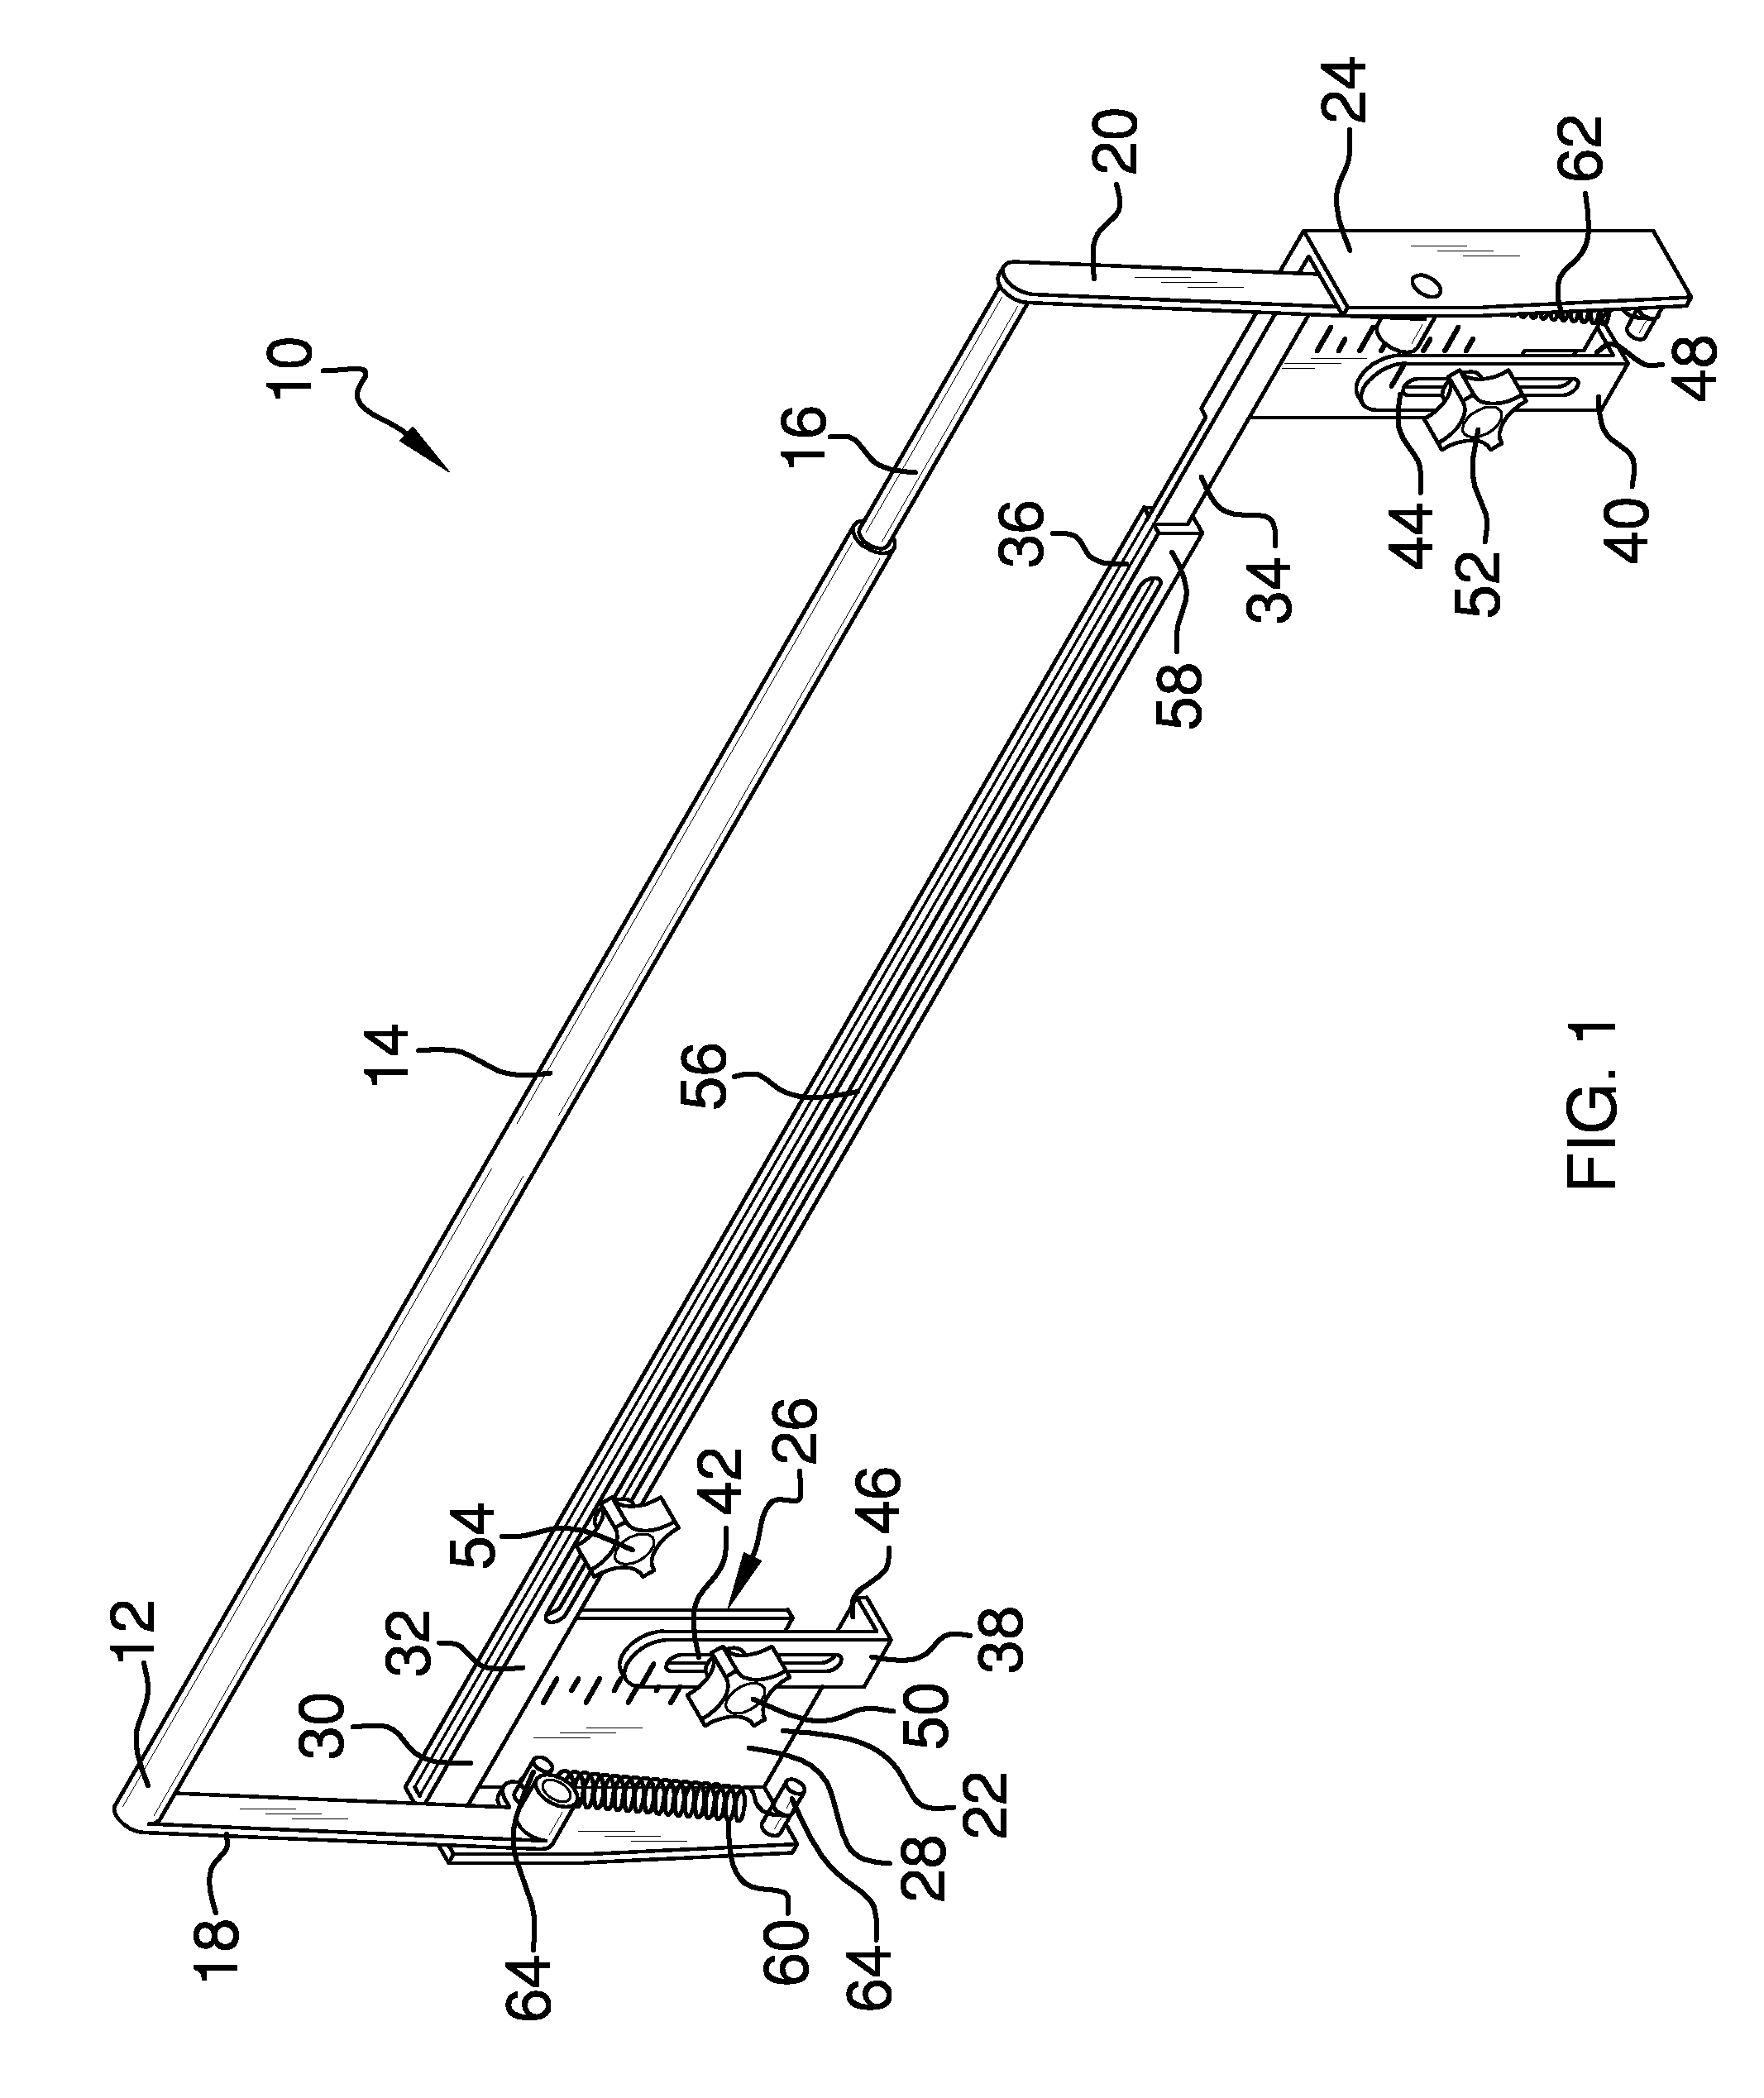 Shingle holder and alignment tool